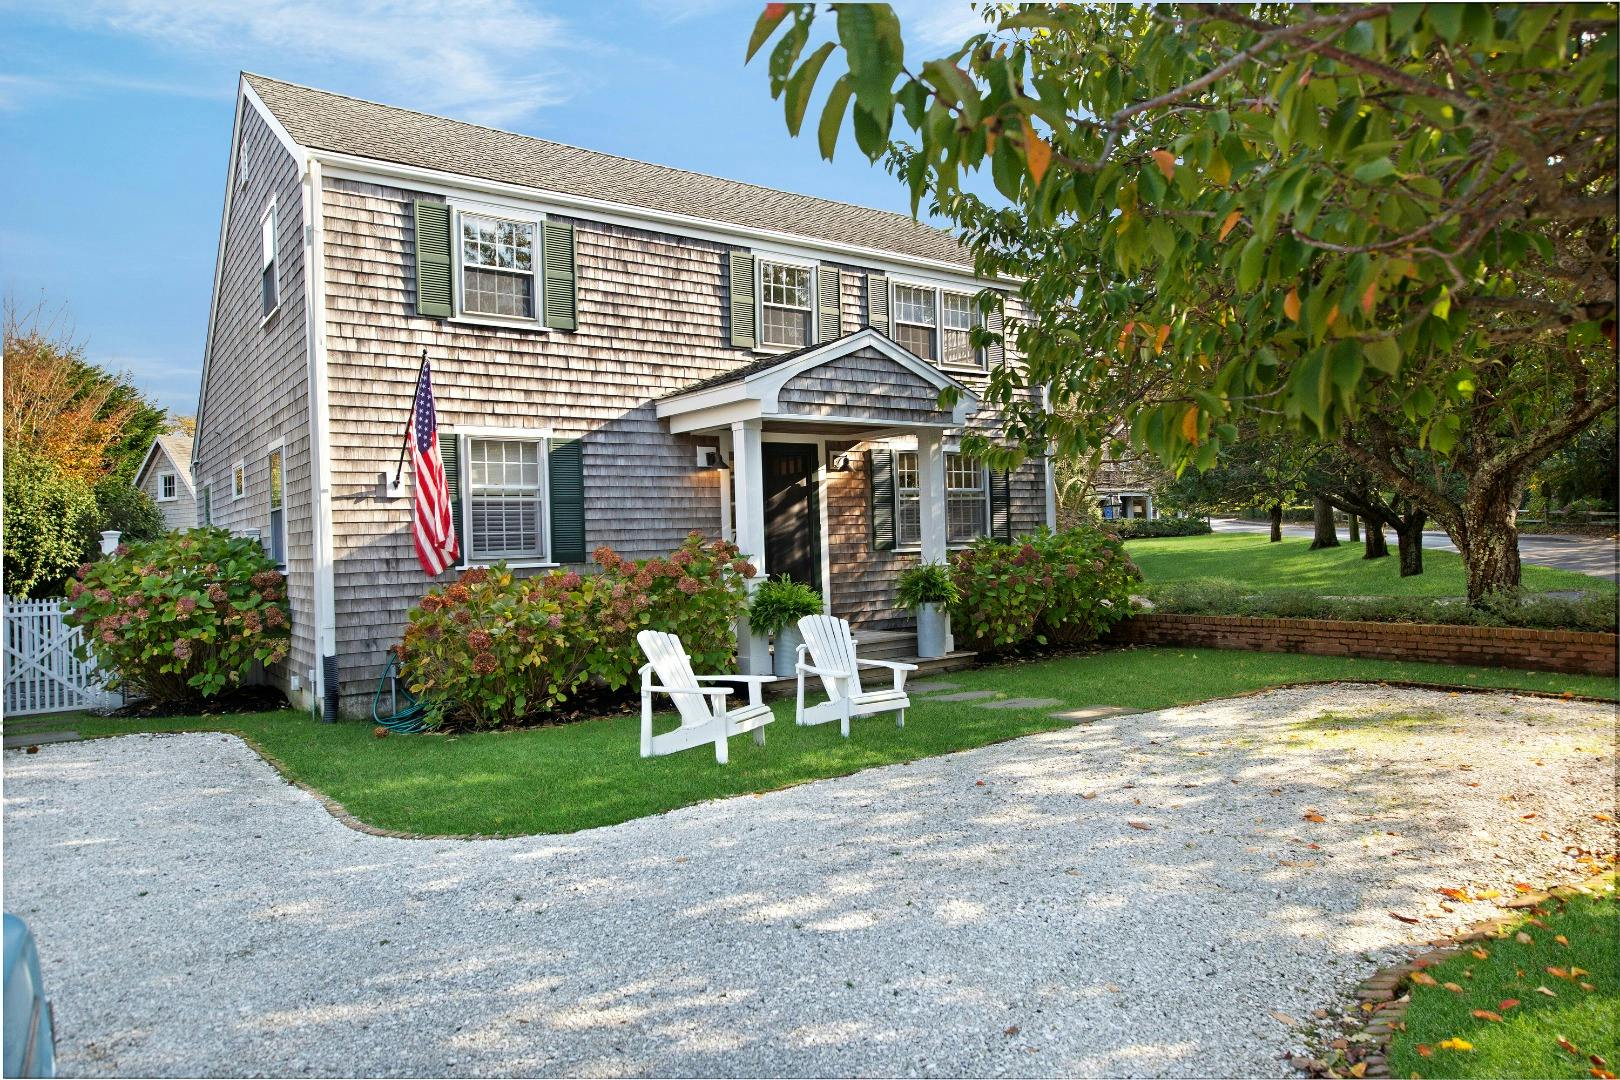 79 Peases Point Way South, Edgartown MA 02539